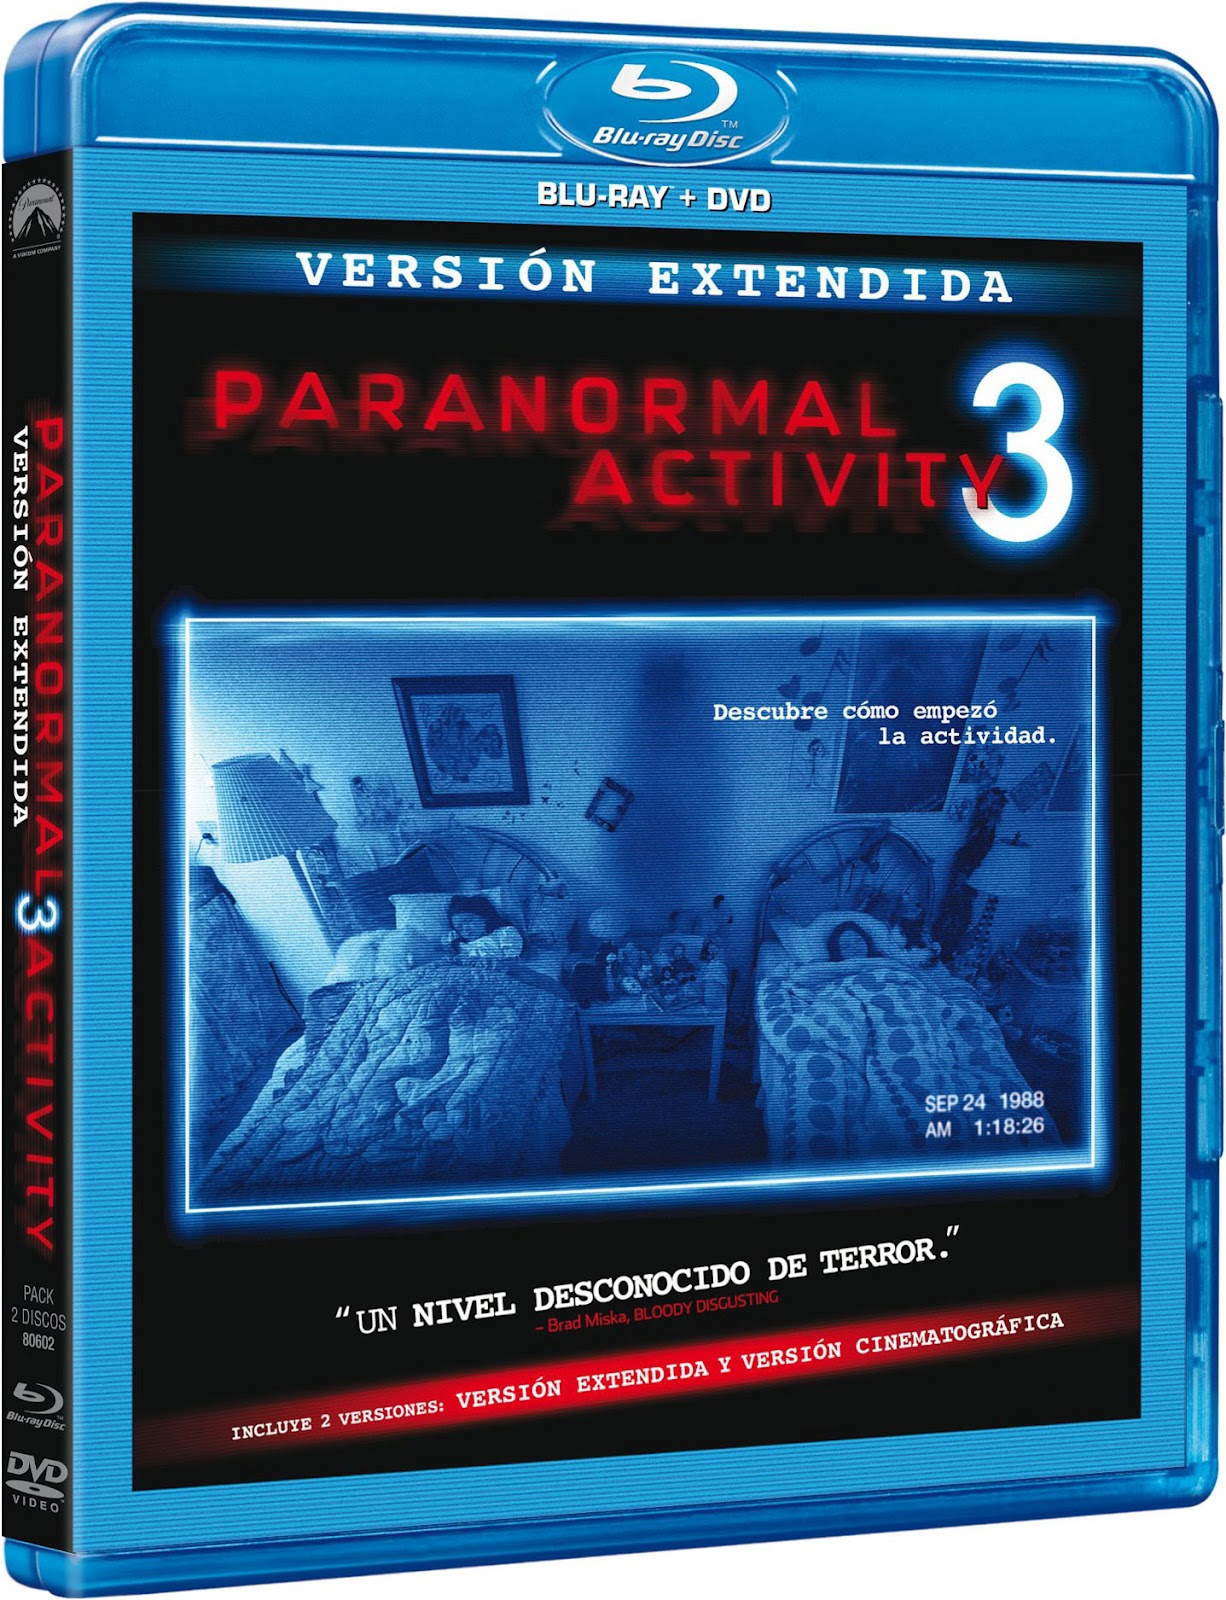 EQUIPO PARANORMAL (DVD)